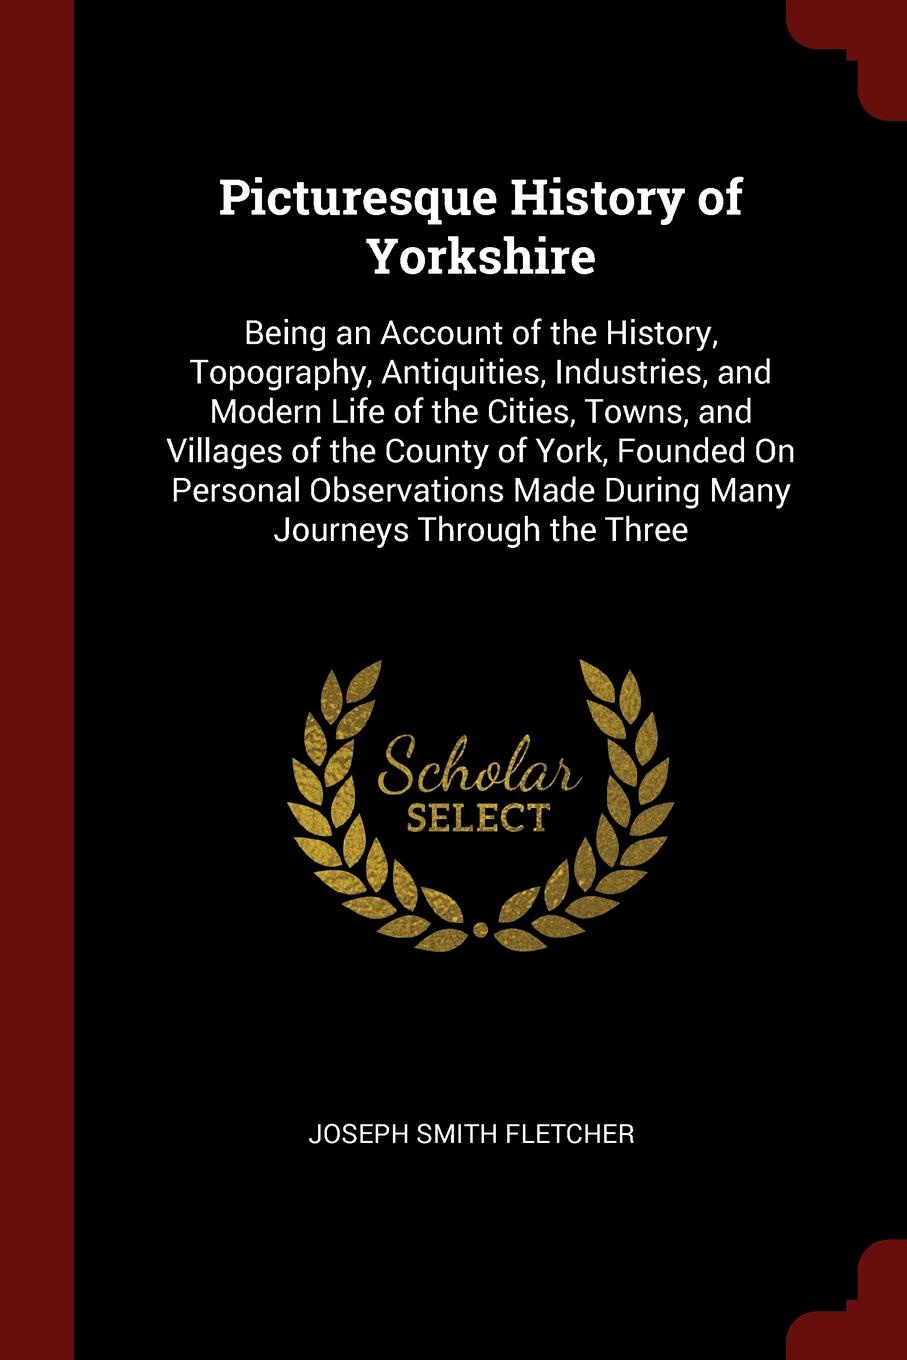 Picturesque History of Yorkshire. Being an Account of the History, Topography, Antiquities, Industries, and Modern Life of the Cities, Towns, and Villages of the County of York, Founded On Personal Observations Made During Many Journeys Through th...